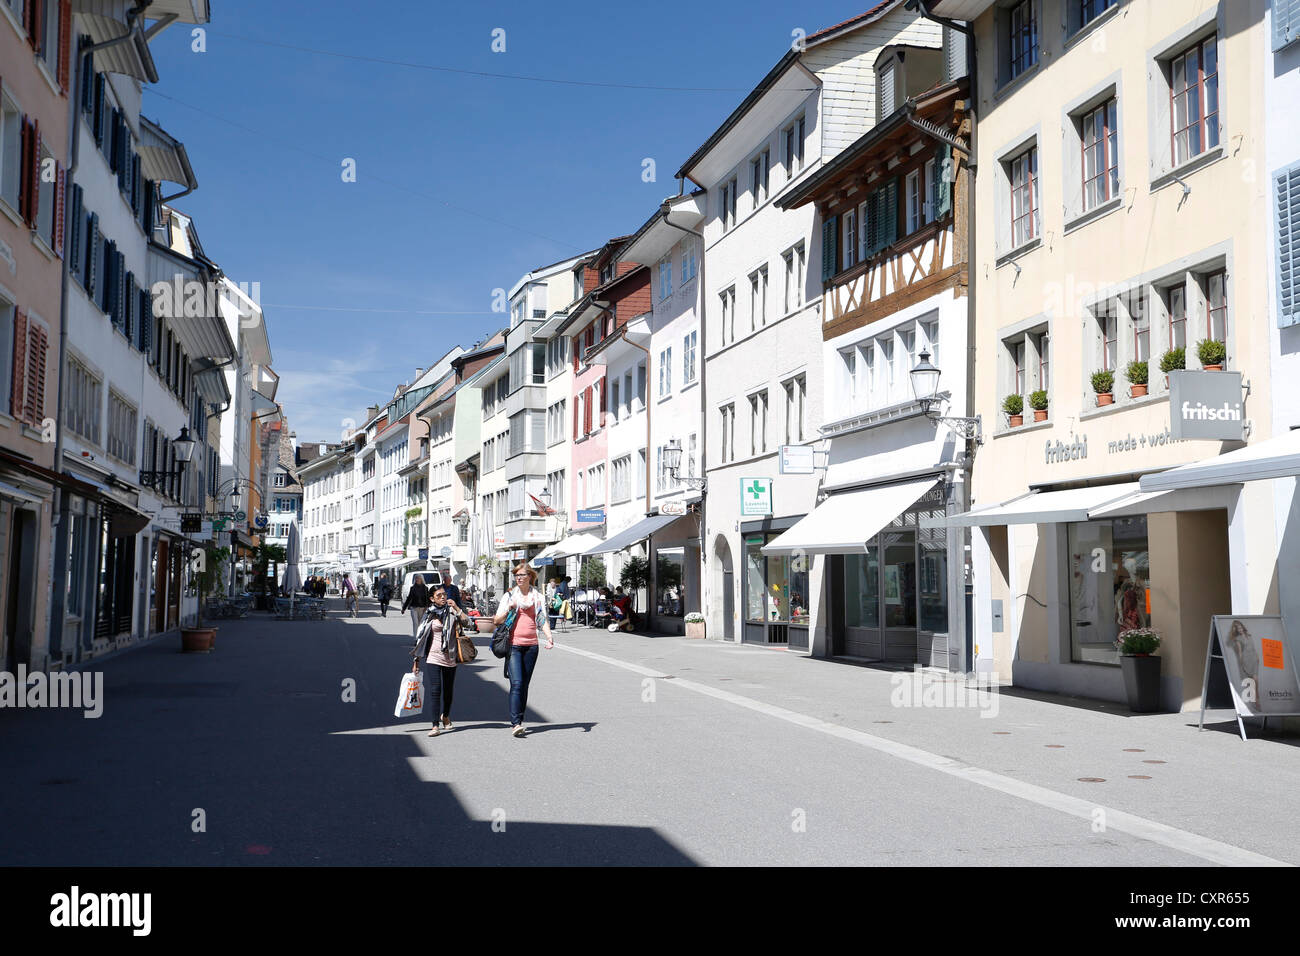 Old town of Steinberggasse street, town centre of Winterthur, Switzerland, Europe Stock Photo